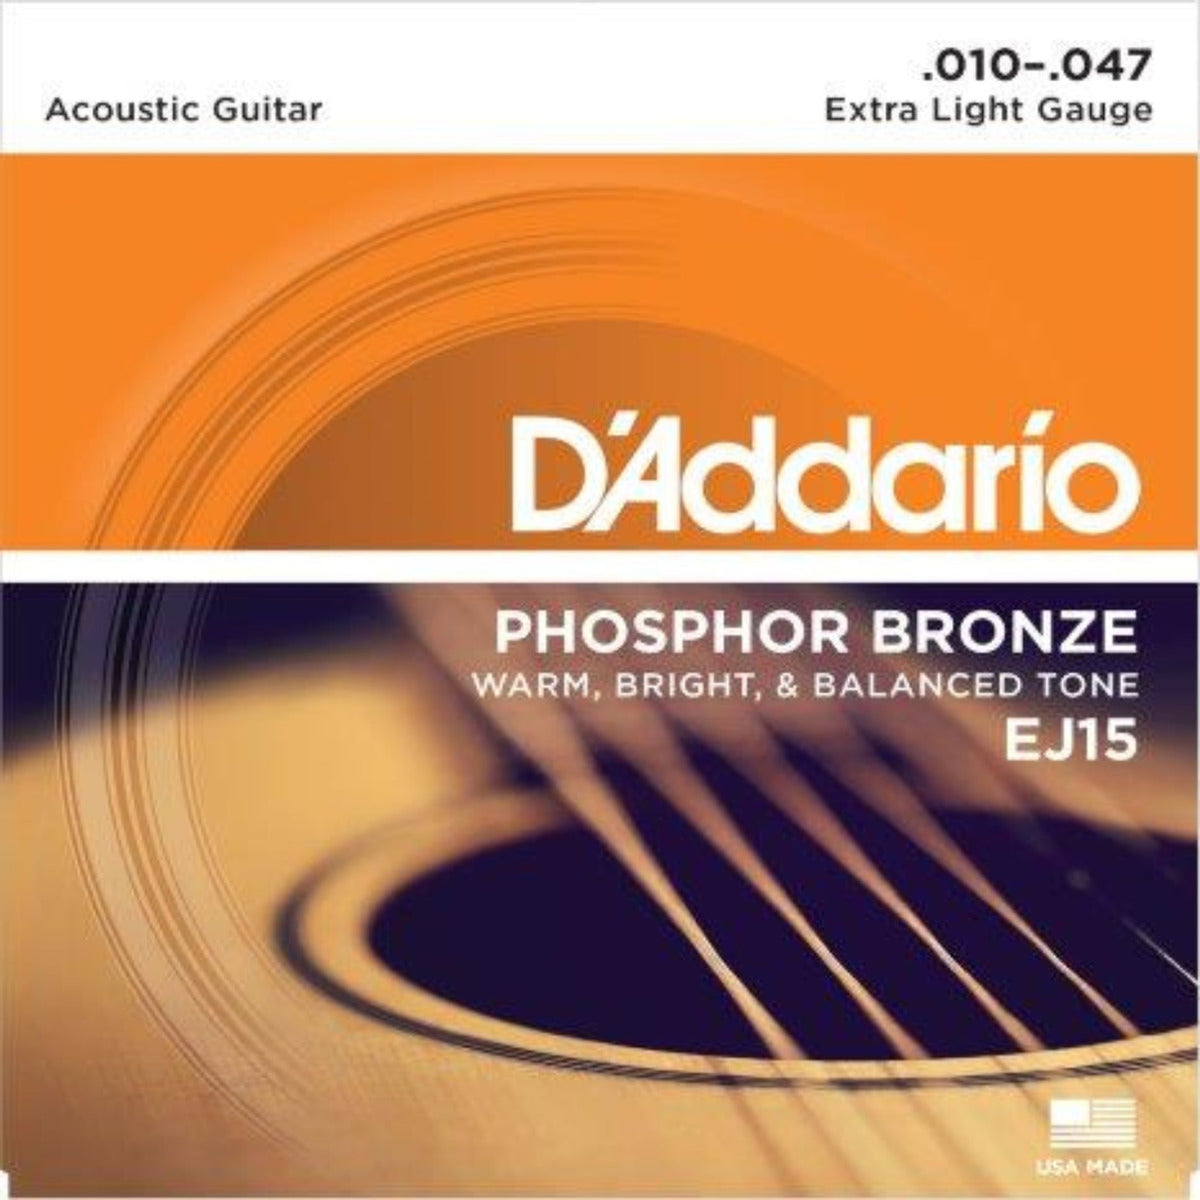 D&#39;Addario&#39;s lightest gauge of acoustic strings, EJ15s are ideal for beginners or any player that prefers a softer tone and easy bending.